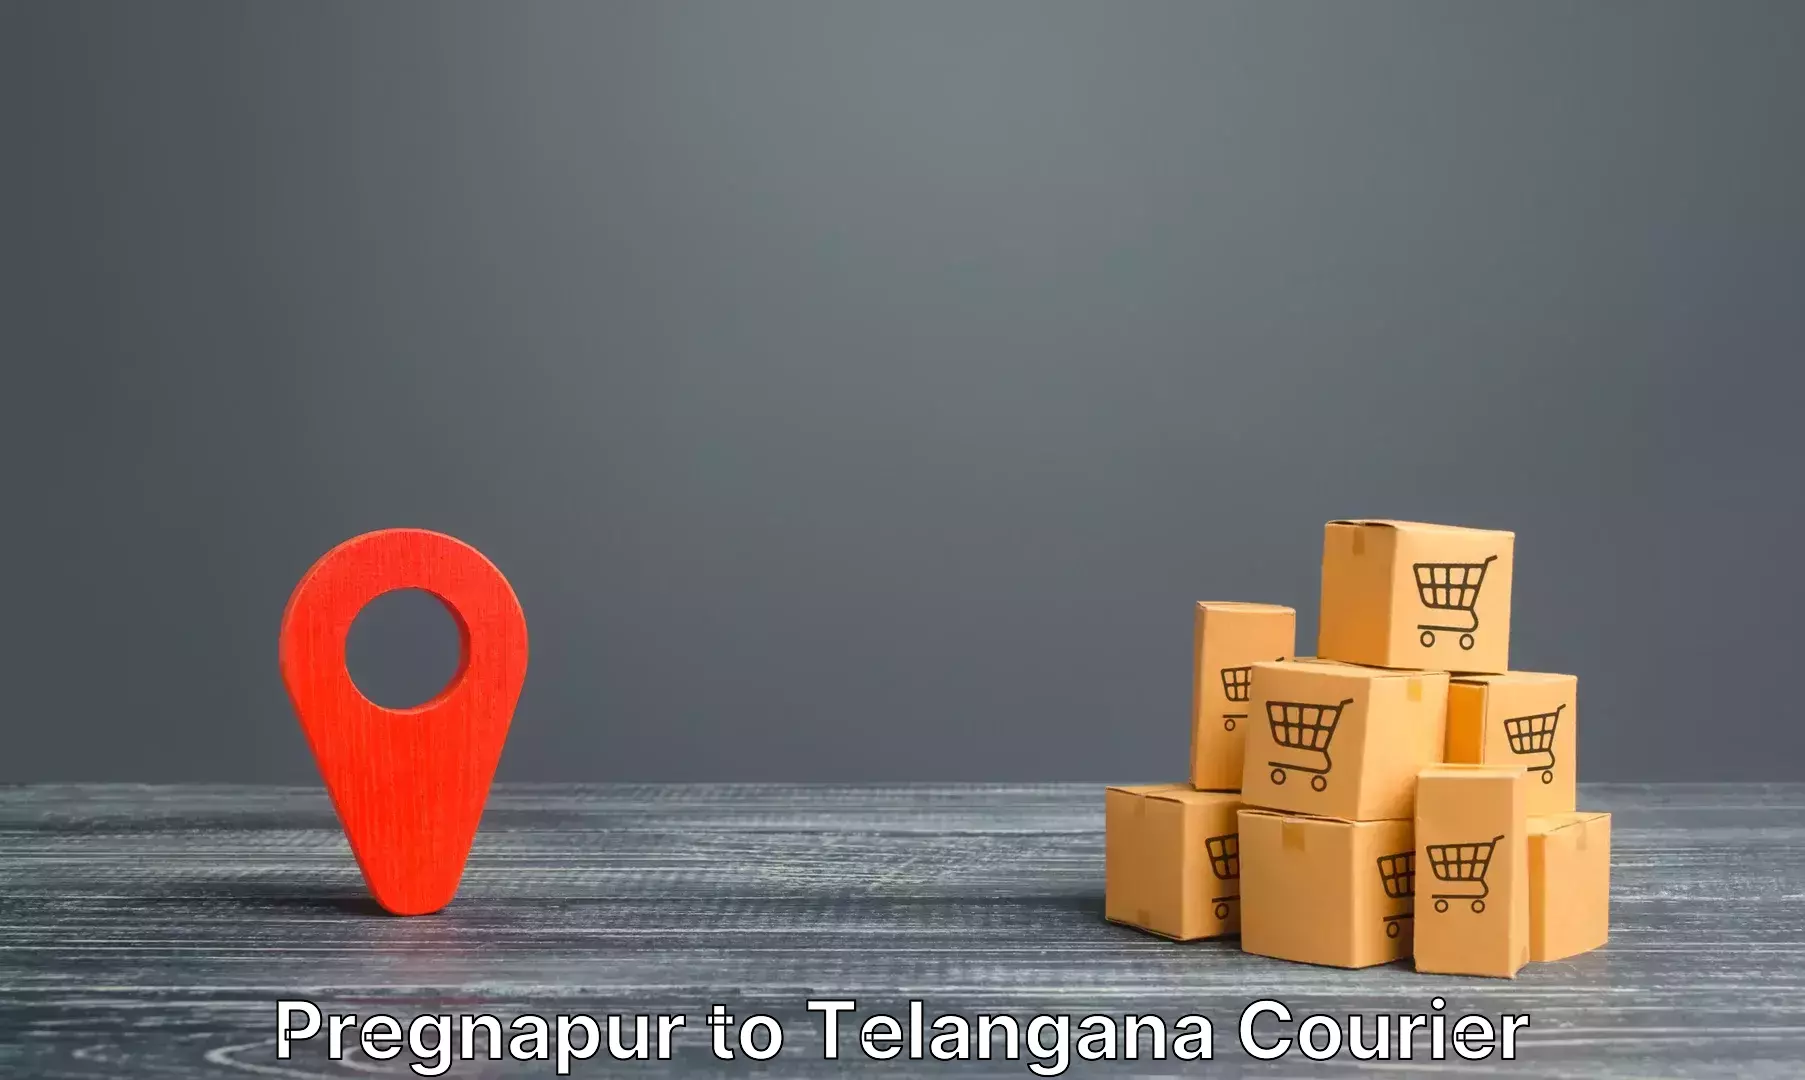 Luggage transport consultancy Pregnapur to University of Hyderabad